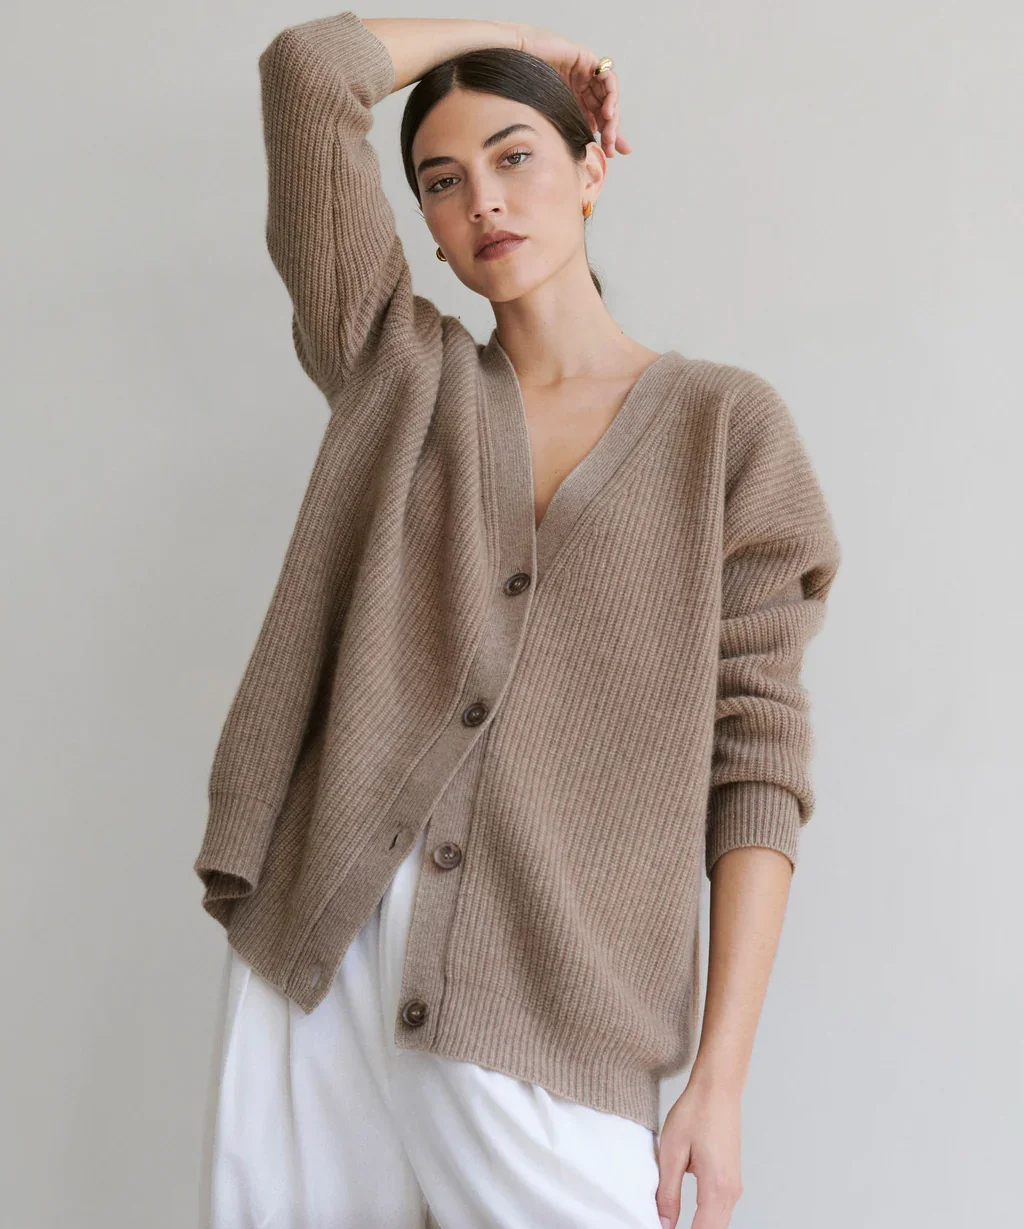 Relaxed Fit Cashmere Sweatshirt